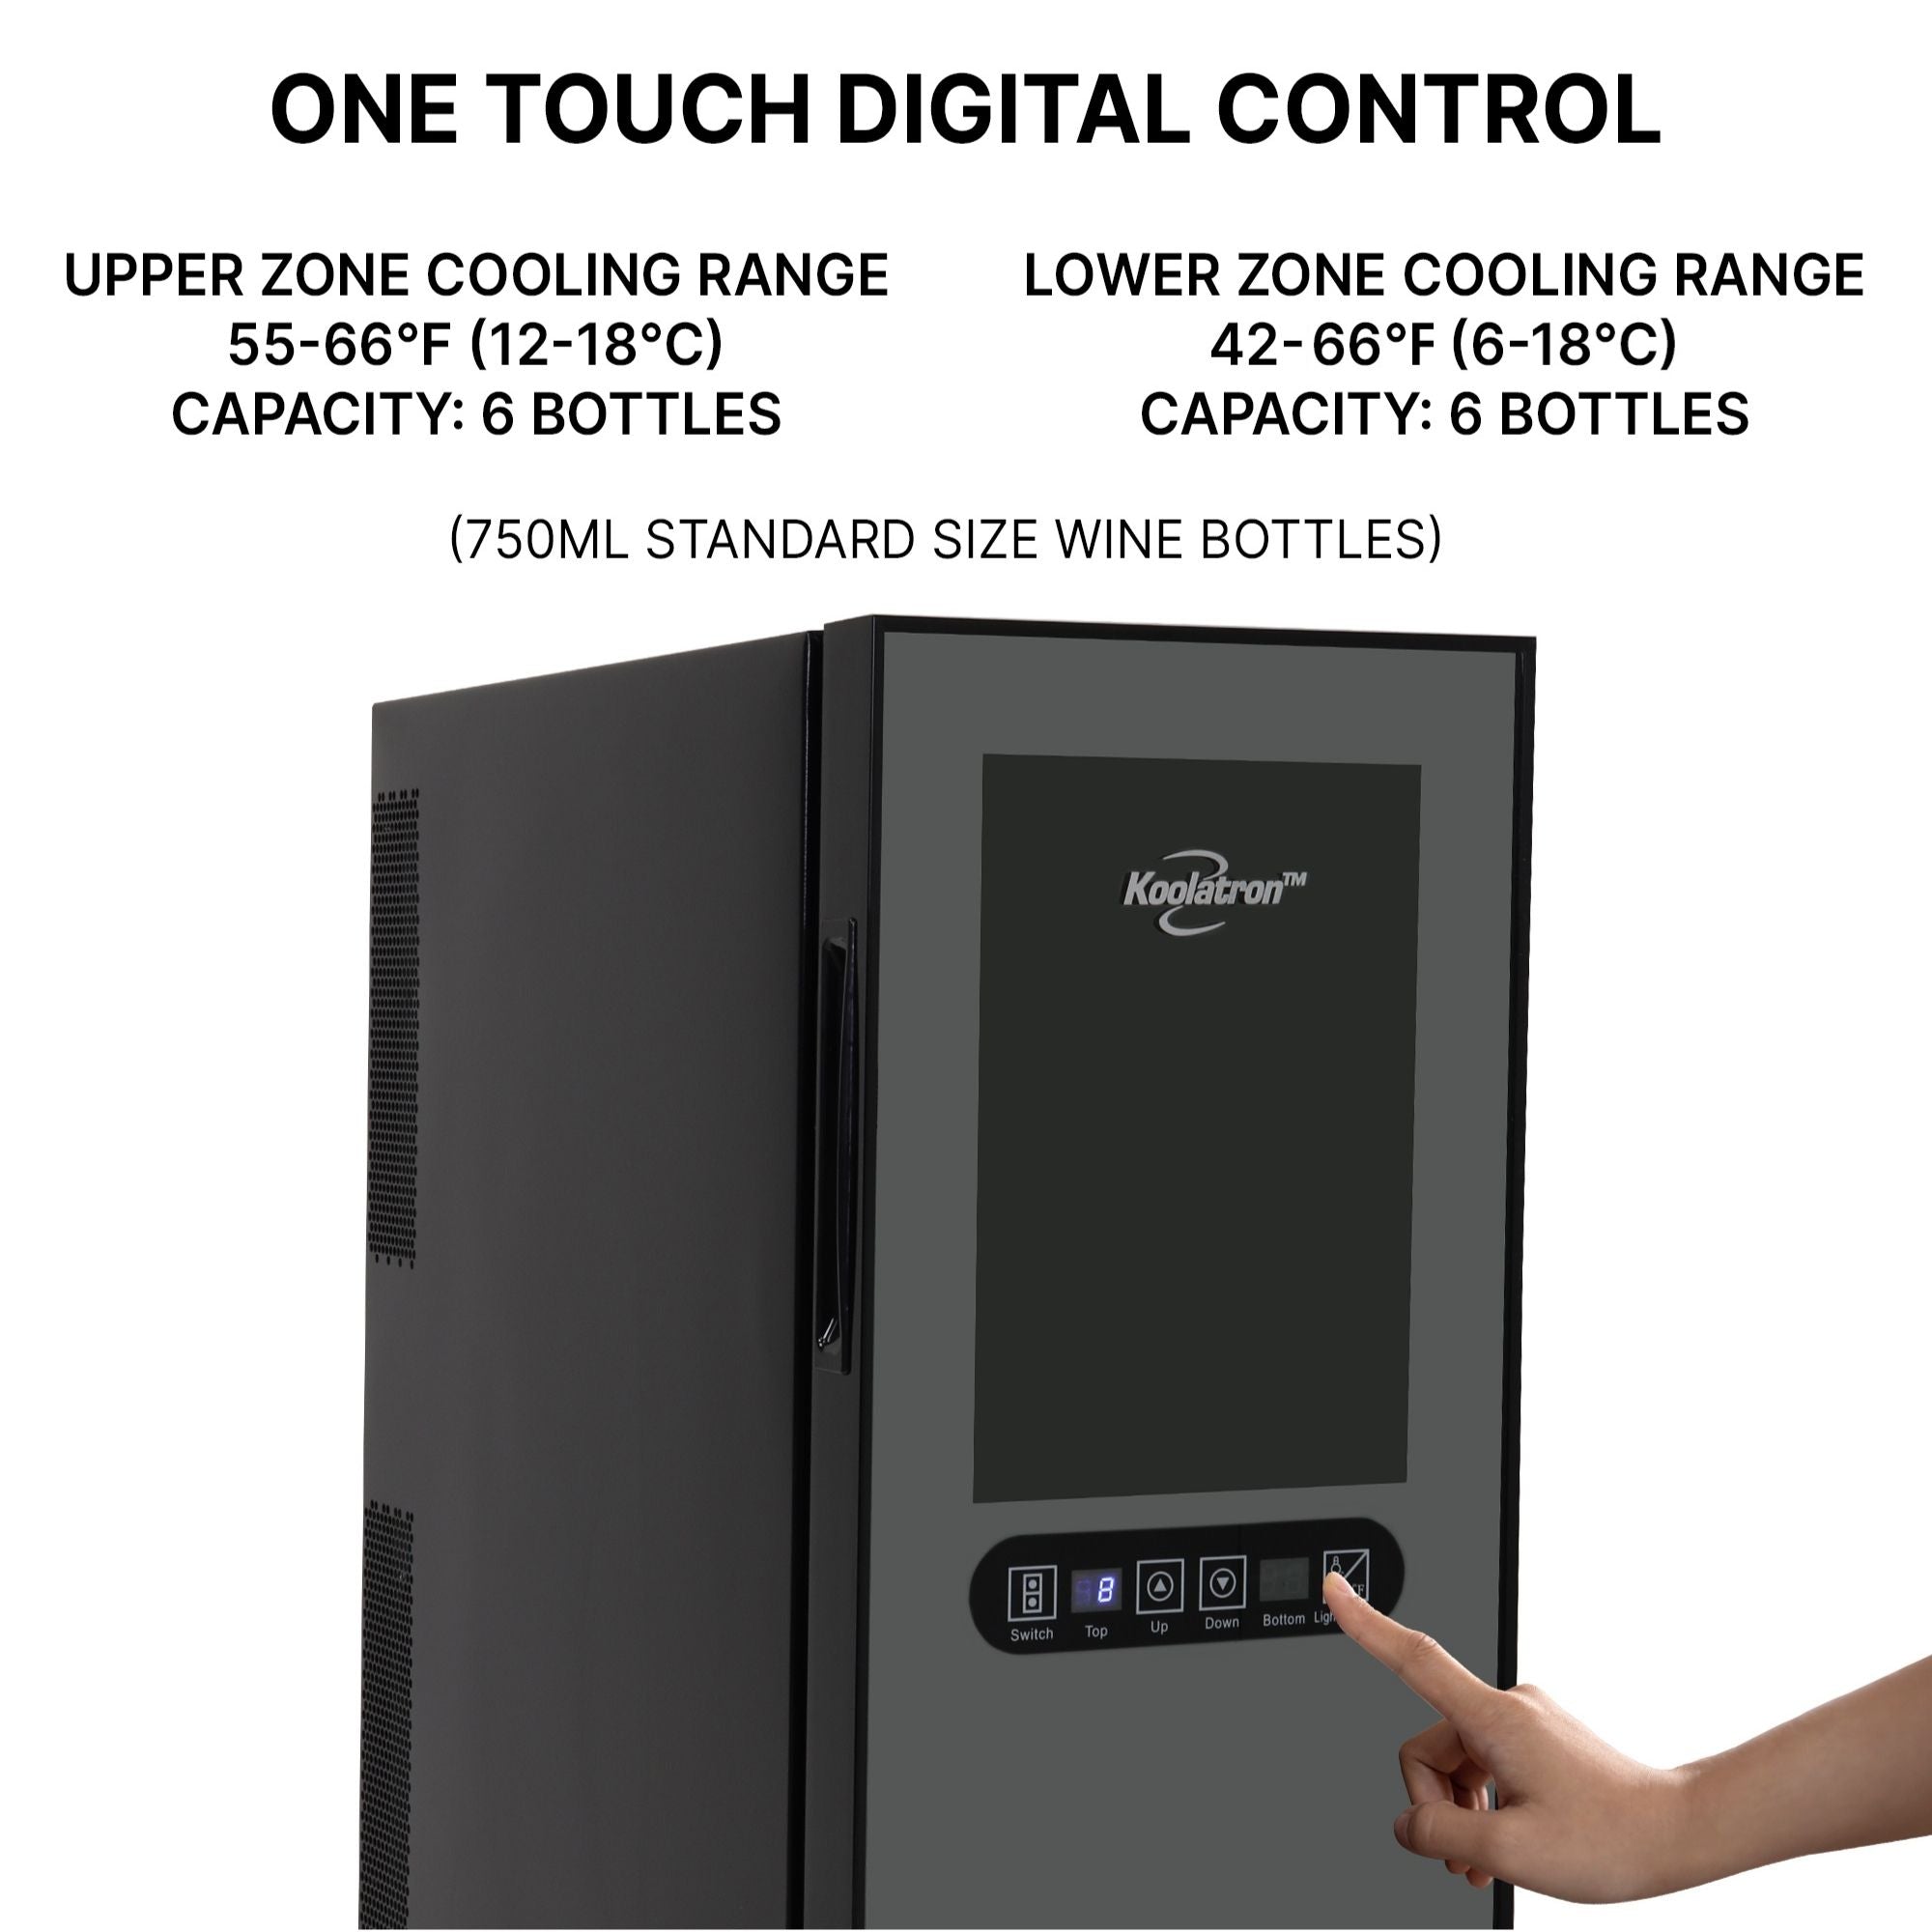 Closeup of person's finger touching button on digital control panel; Text above reads "One touch digital control" and lists temperature range and capacity